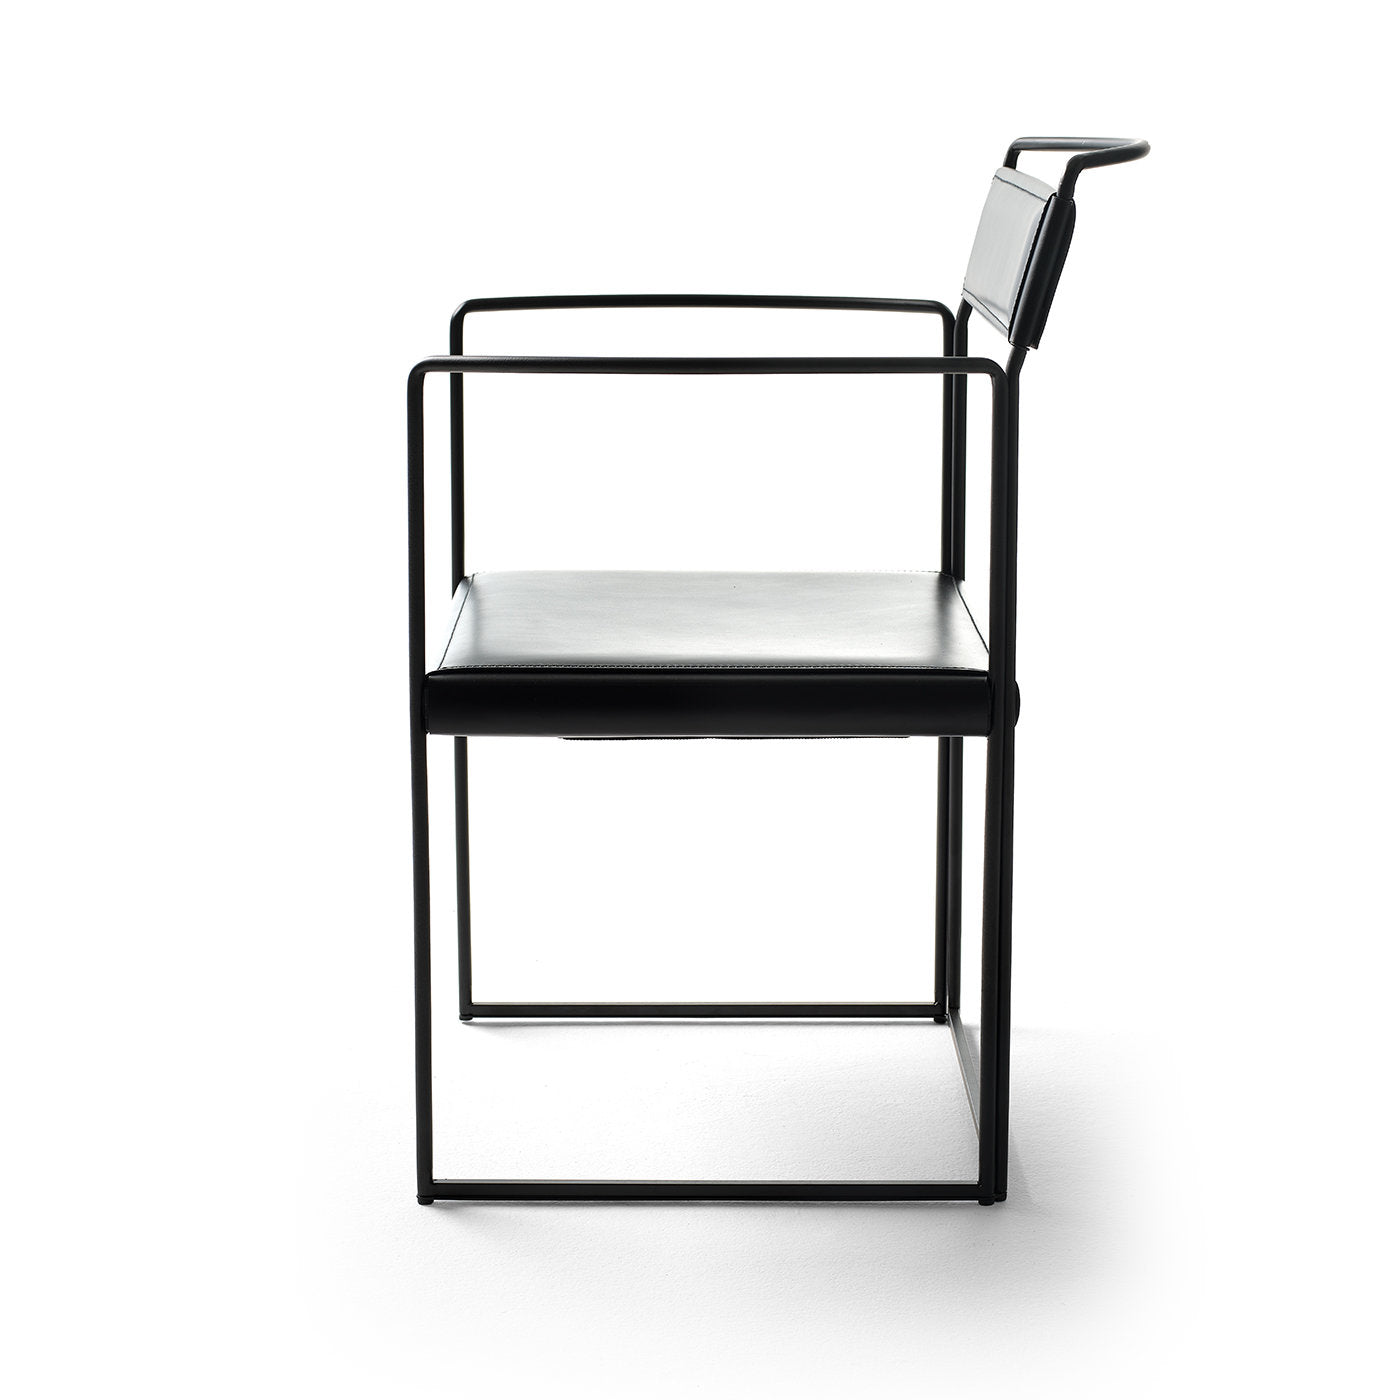 New Outline Black Chair with Armrests by Alberto Colzani - Alternative view 1